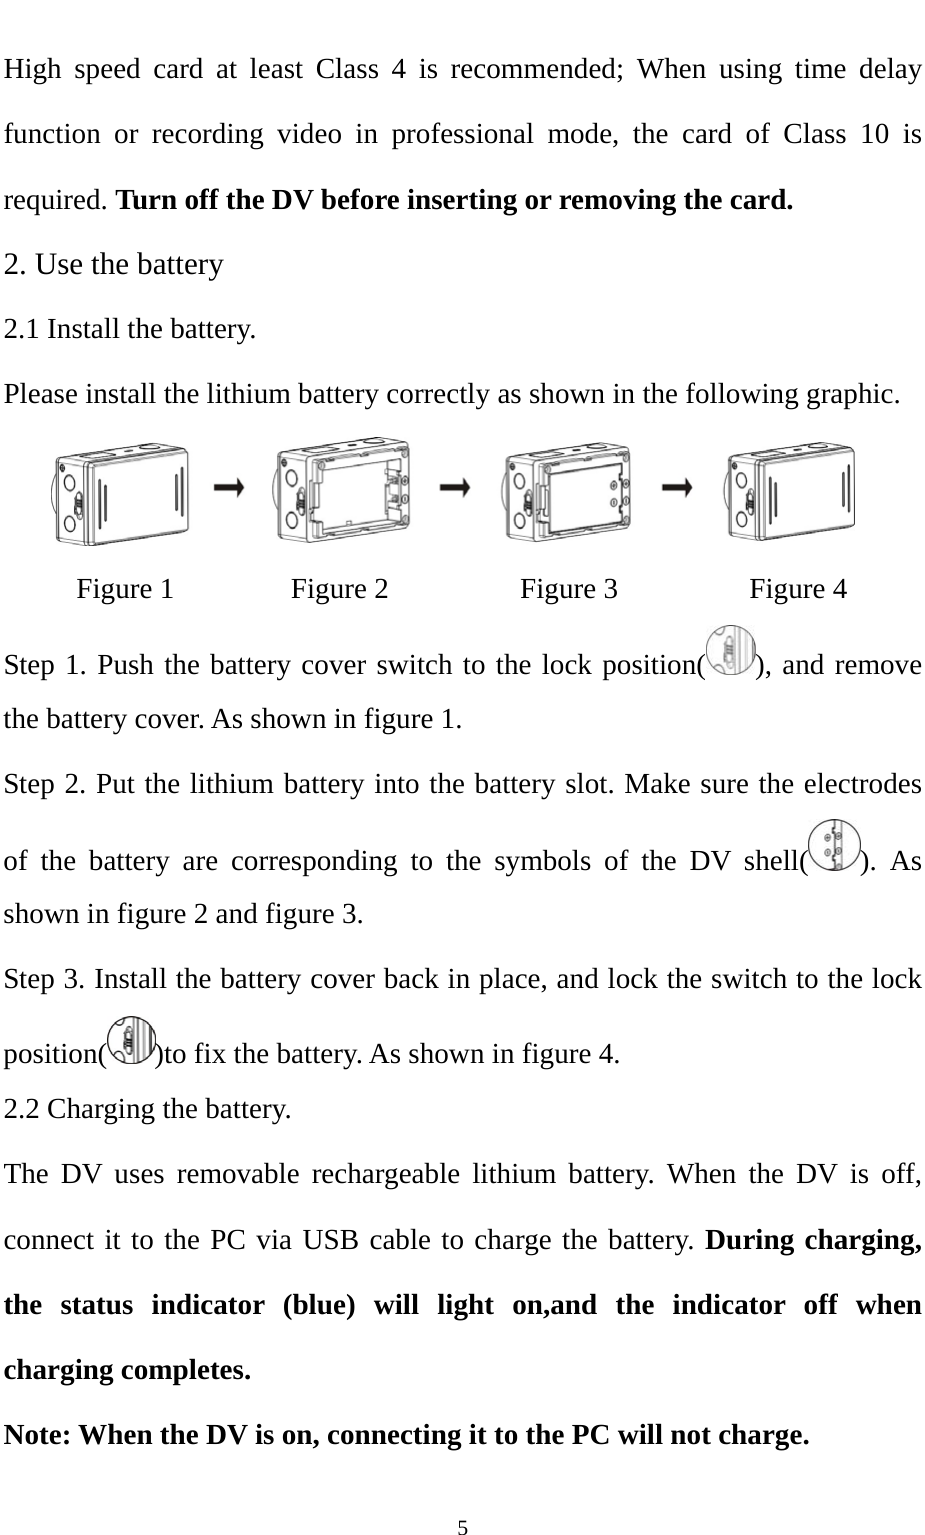   5High speed card at least Class 4 is recommended; When using time delay function or recording video in professional mode, the card of Class 10 is required. Turn off the DV before inserting or removing the card.   2. Use the battery 2.1 Install the battery. Please install the lithium battery correctly as shown in the following graphic.     Figure 1        Figure 2         Figure 3         Figure 4 Step 1. Push the battery cover switch to the lock position( ), and remove the battery cover. As shown in figure 1. Step 2. Put the lithium battery into the battery slot. Make sure the electrodes of the battery are corresponding to the symbols of the DV shell( ). As shown in figure 2 and figure 3. Step 3. Install the battery cover back in place, and lock the switch to the lock position( )to fix the battery. As shown in figure 4.  2.2 Charging the battery.   The DV uses removable rechargeable lithium battery. When the DV is off, connect it to the PC via USB cable to charge the battery. During charging, the status indicator (blue) will light on,and the indicator off when charging completes. Note: When the DV is on, connecting it to the PC will not charge. 